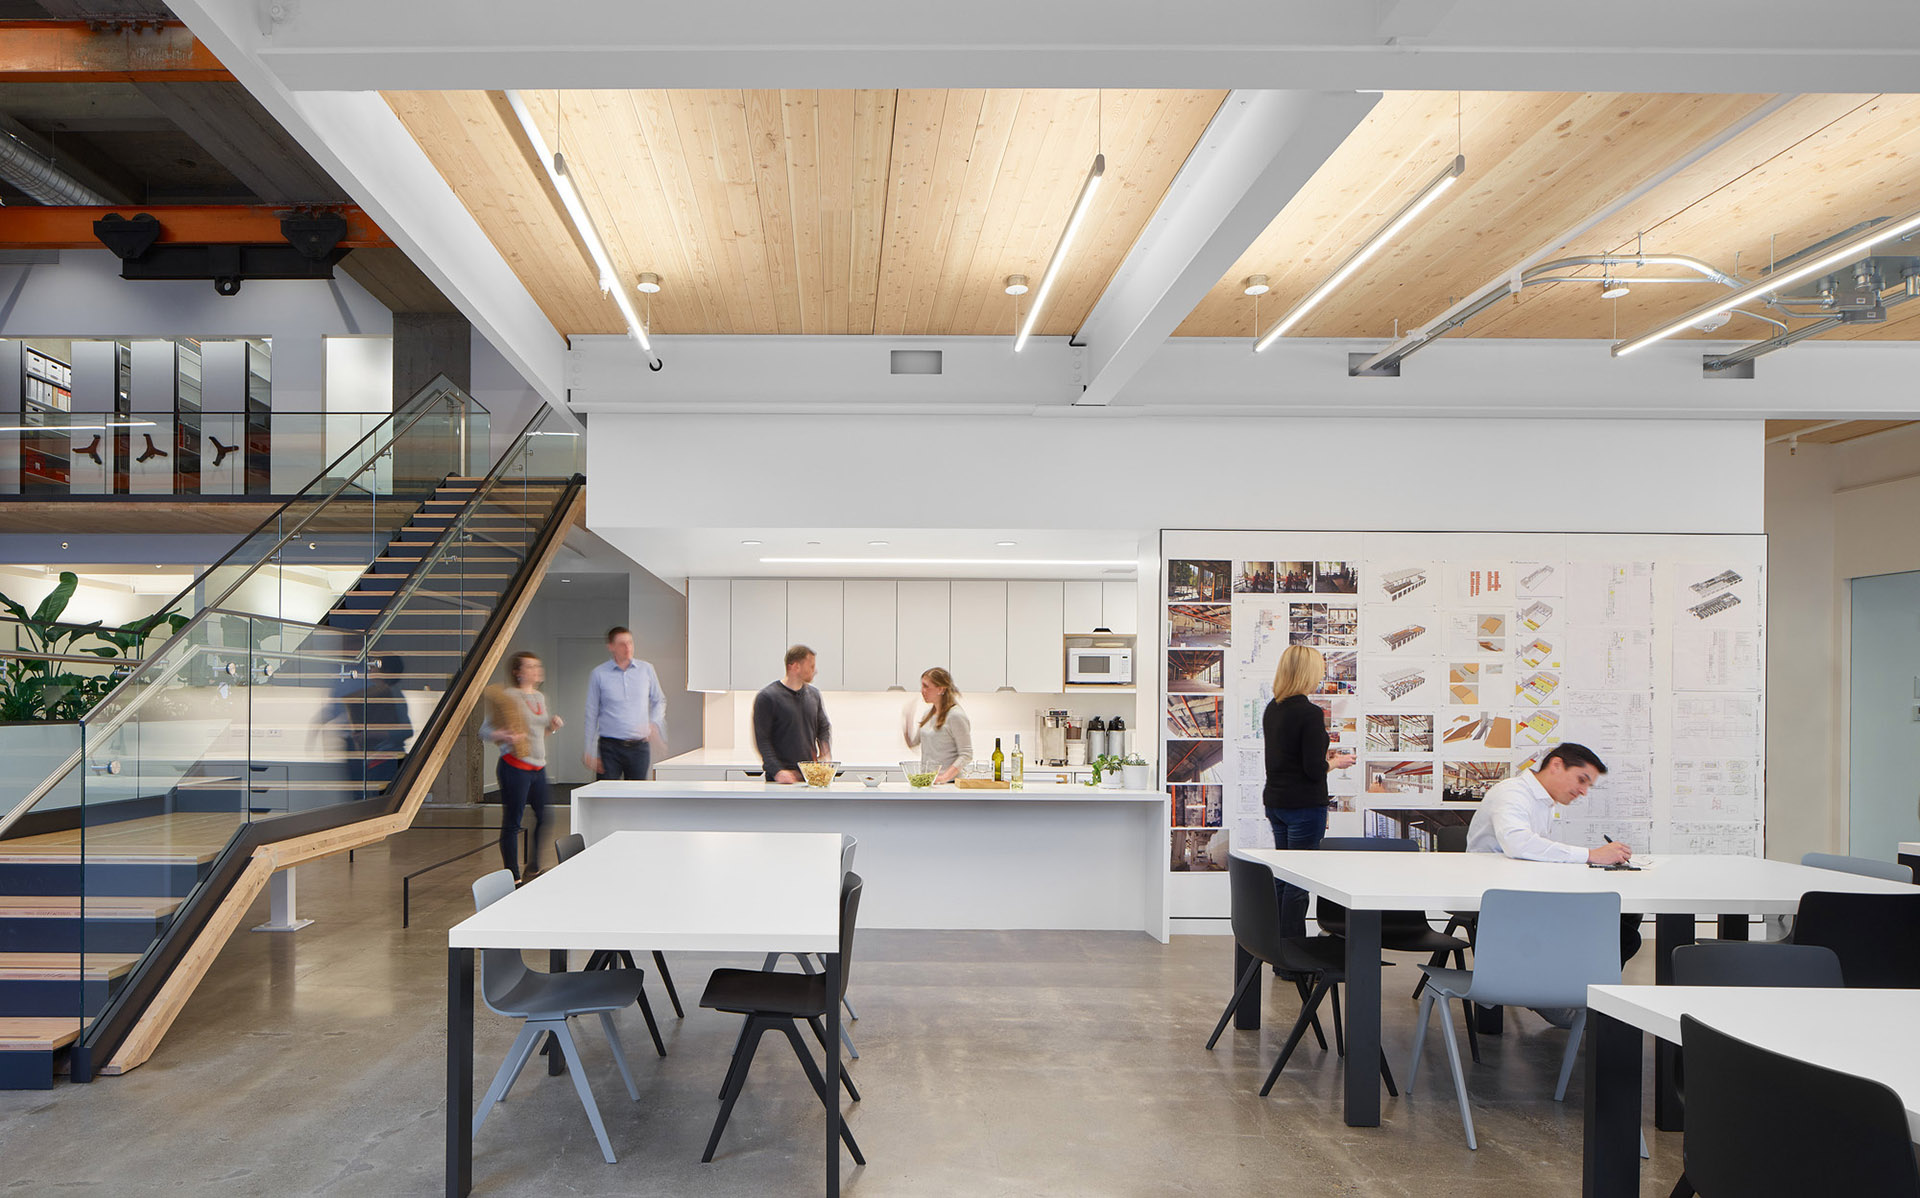 The SGR office in Portland. A design geared toward quality of work, relationships, and energy